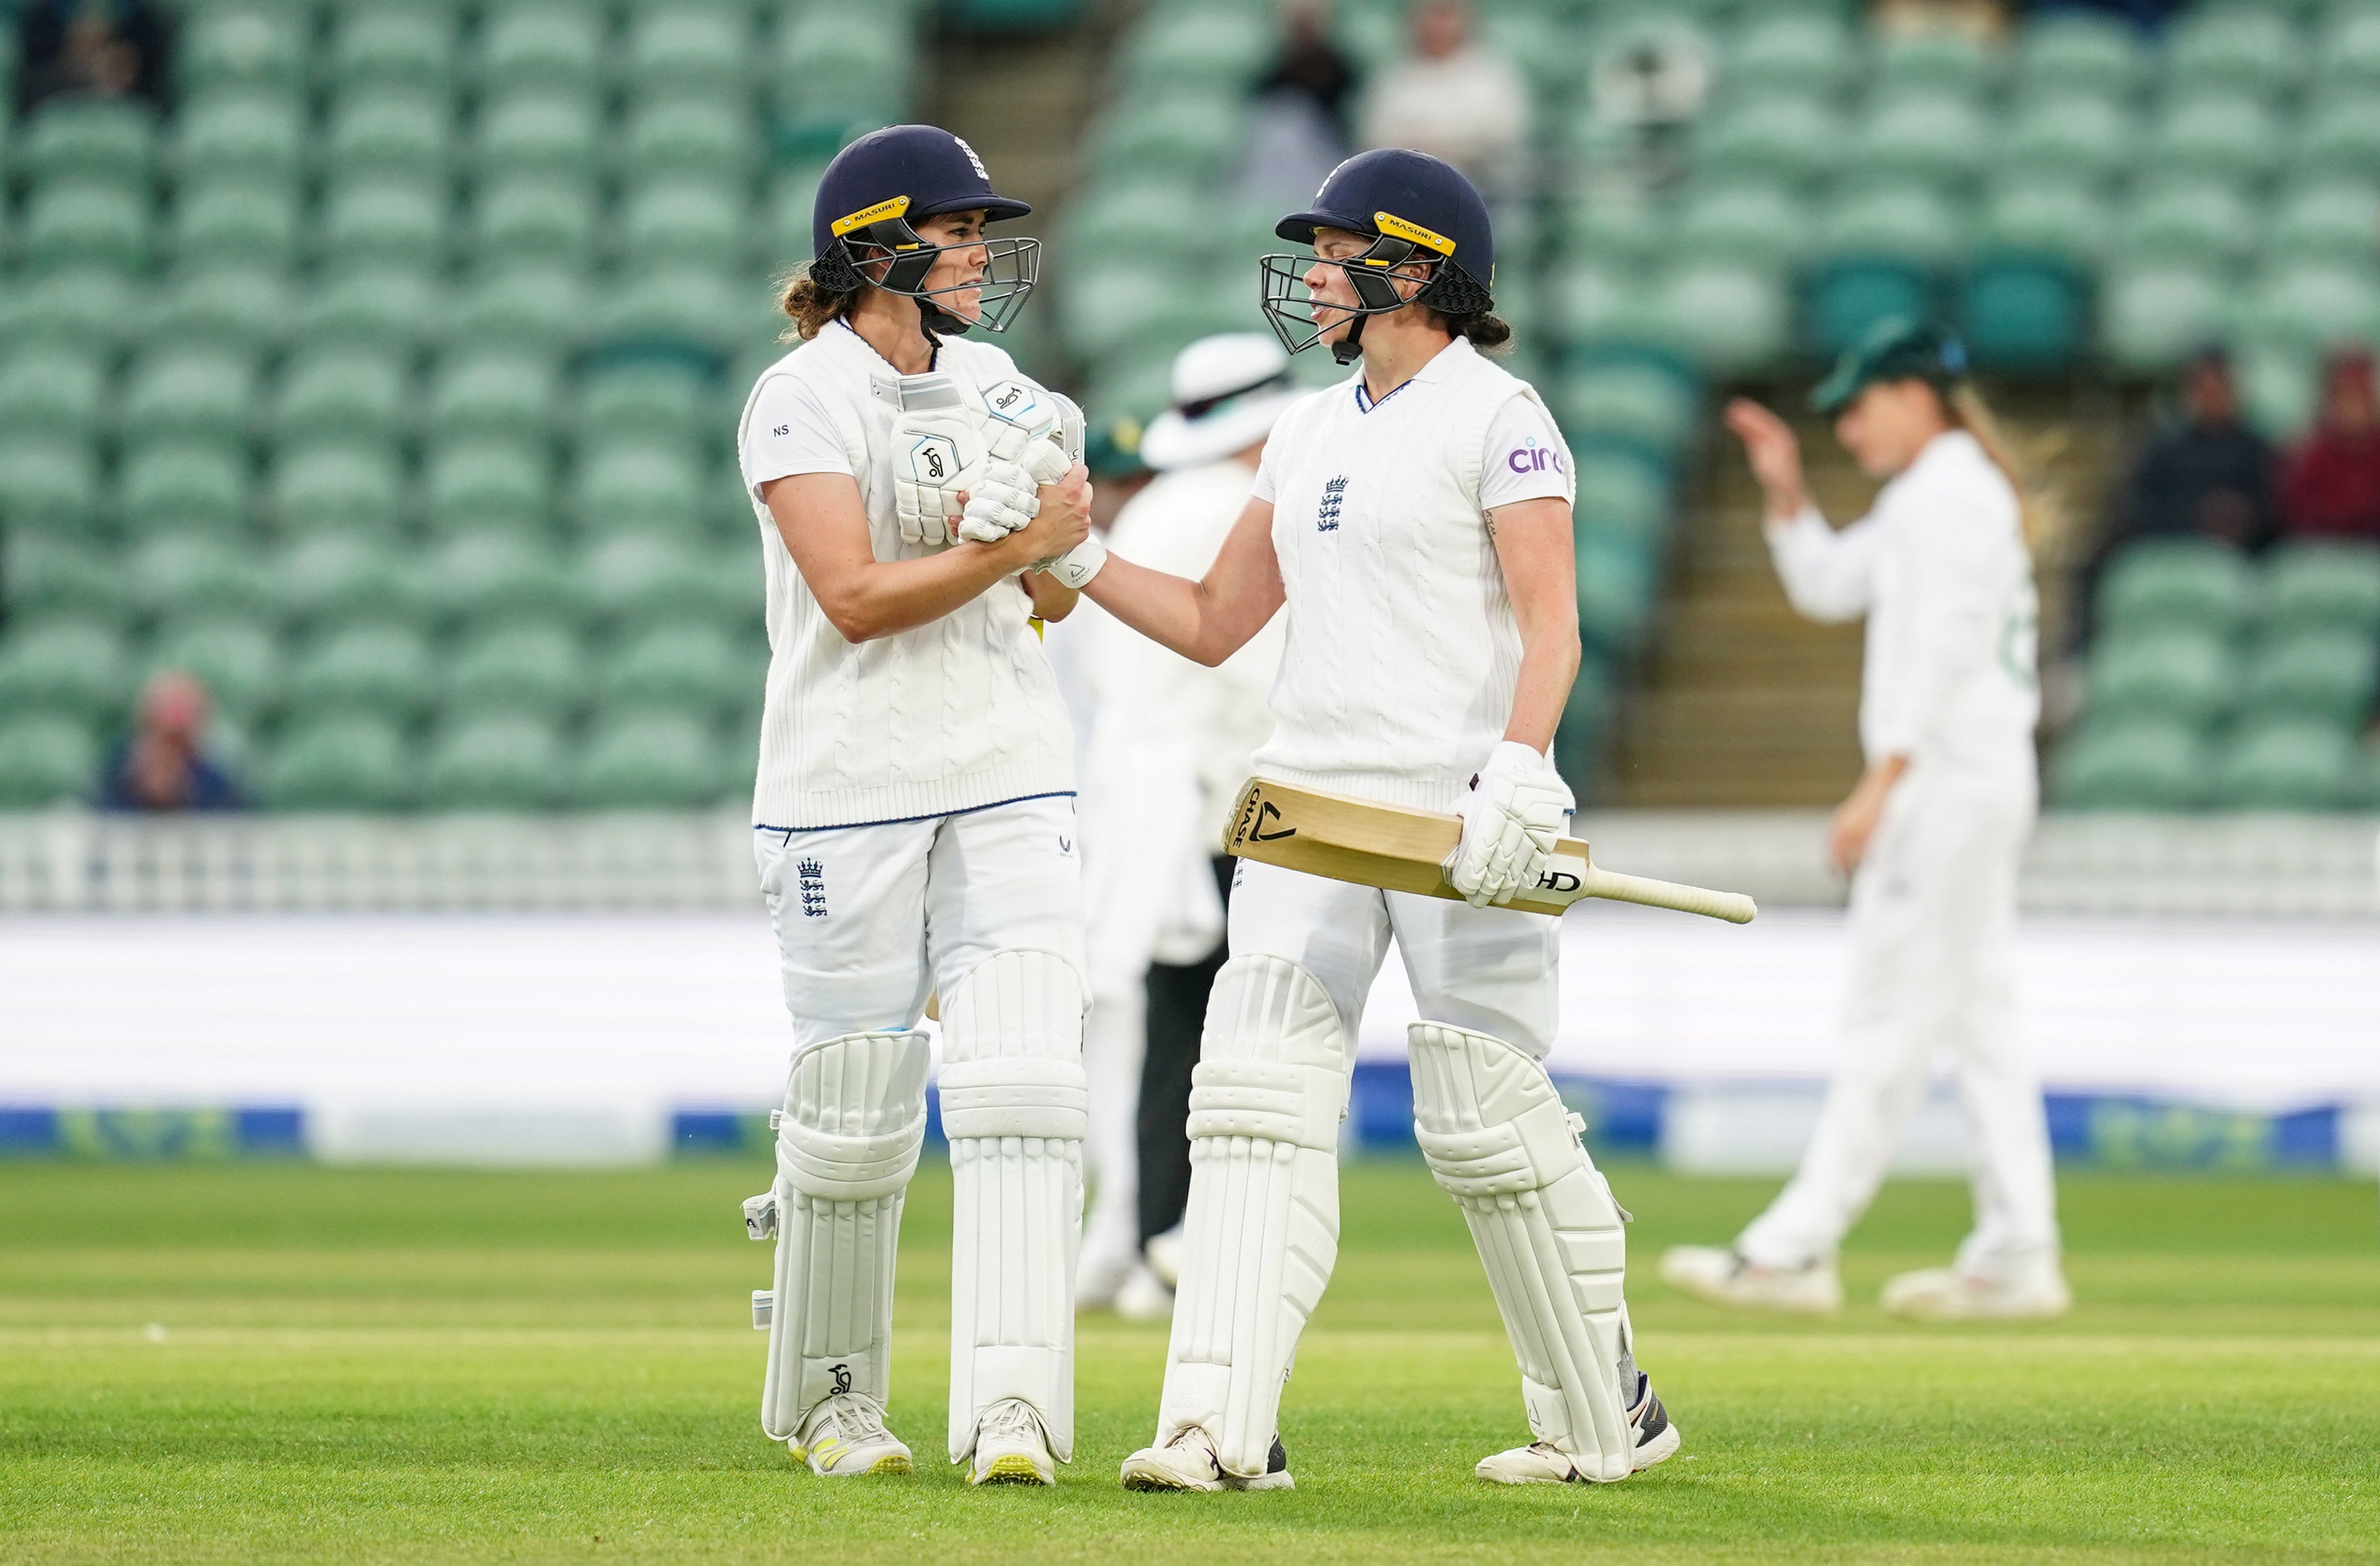 Nat Sciver, left, and Alice Davidson-Richards hit maiden Test centuries as England sailed into a 44-run lead at the end of day two (David Davies/PA)